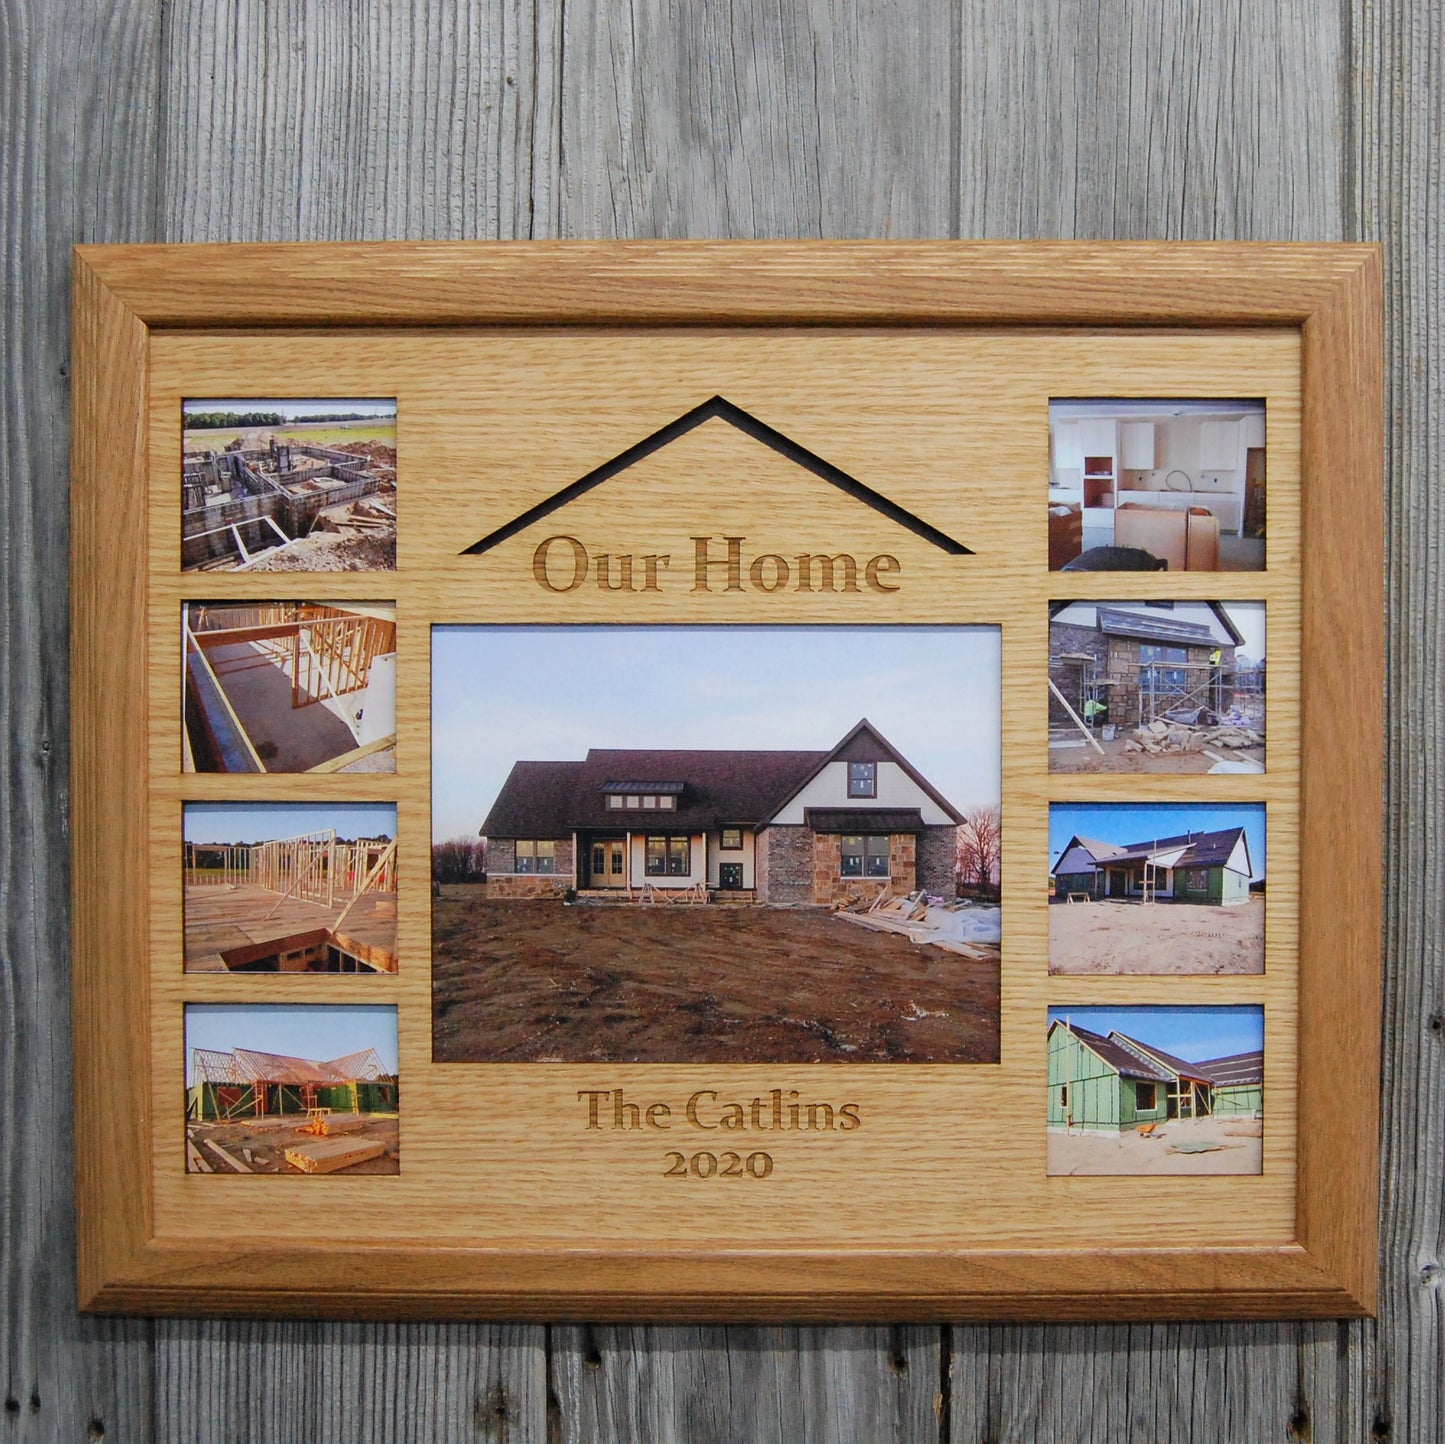 Our Home Picture Frame - 16x20 Frame Holds Multiple Photos